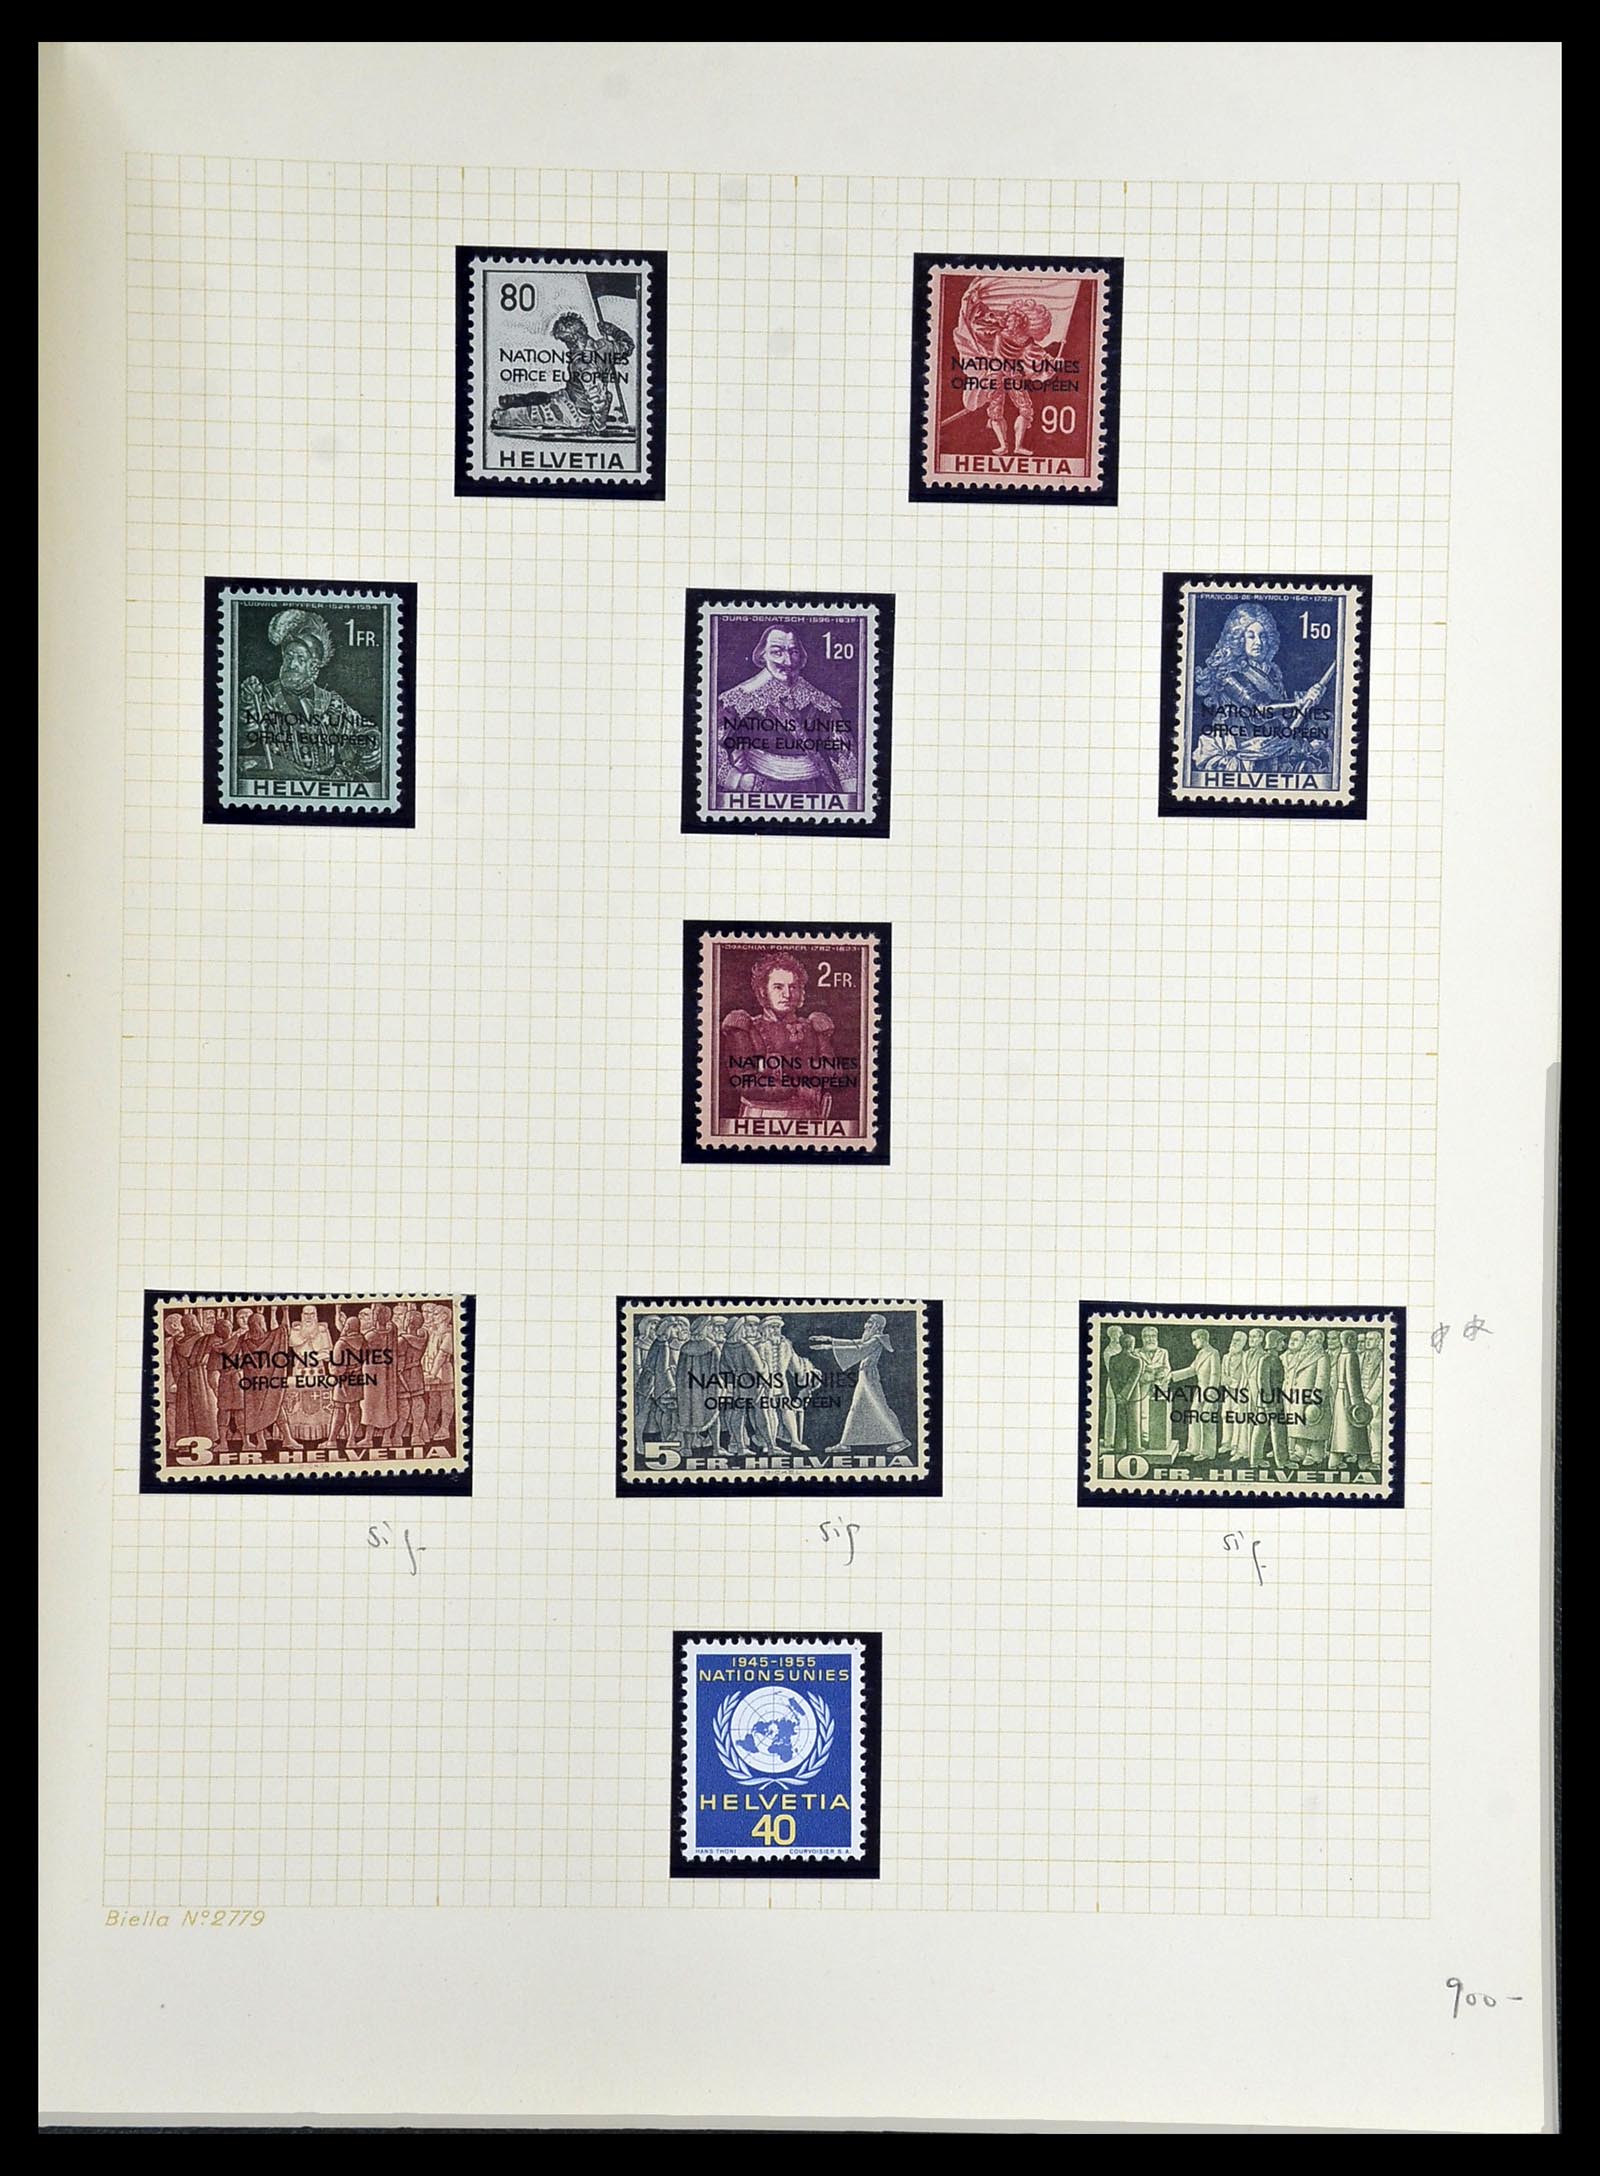 34135 038 - Stamp collection 34135 Switzerland back of the book 1910-1950.